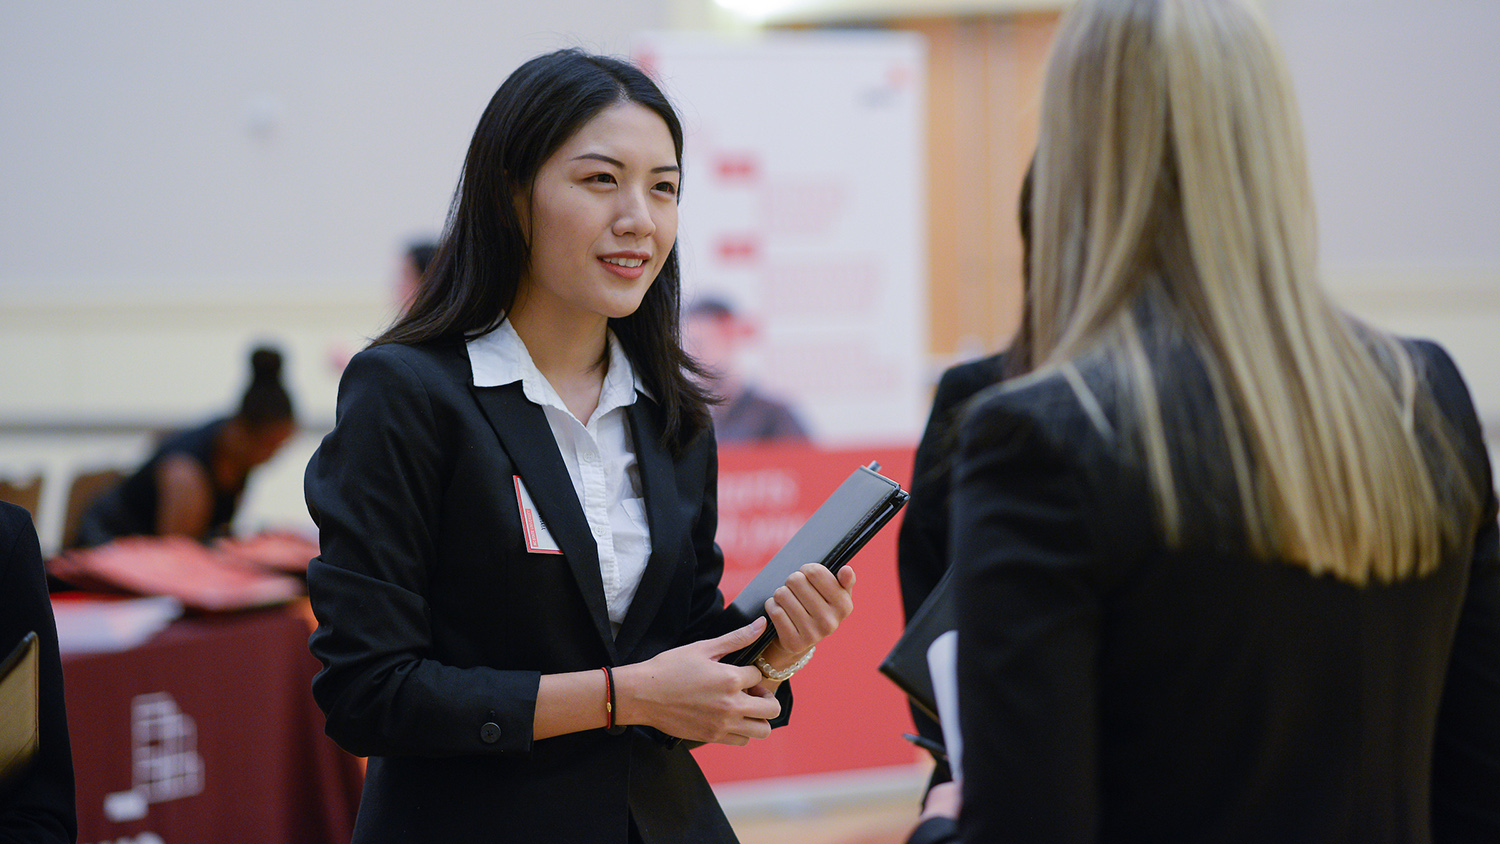 A student talks to someone at a job fair